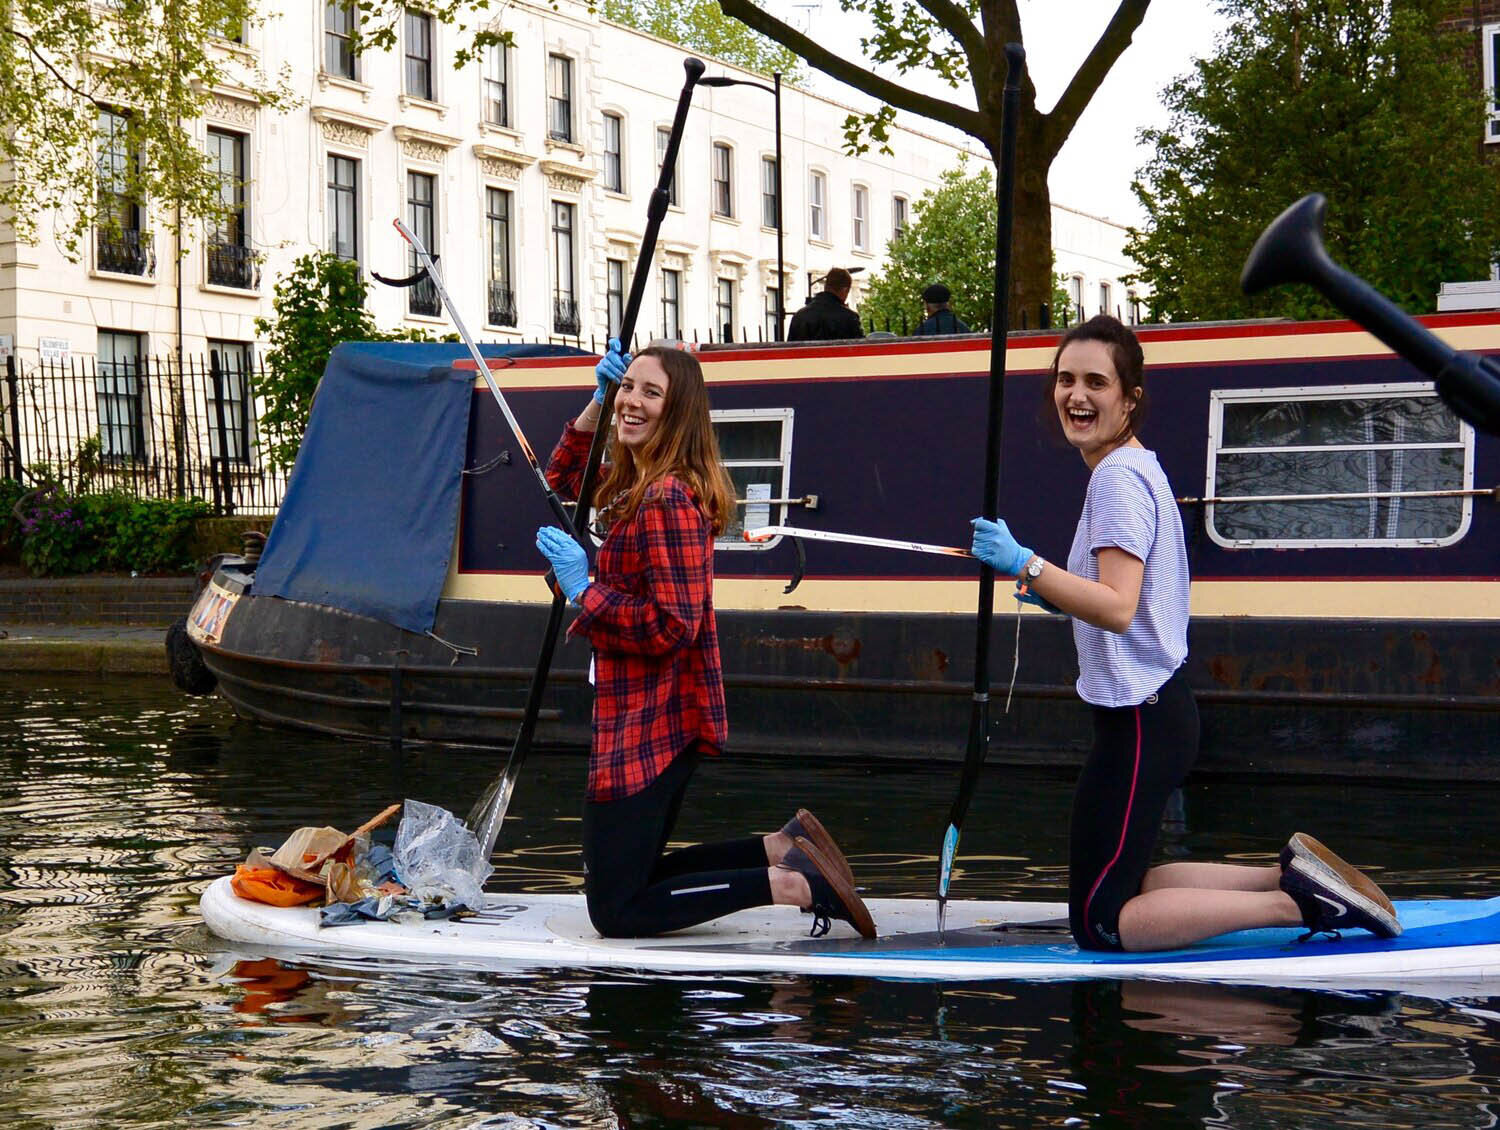 03_Paddington_Paddle_and_pick_canal_clean_up_Active360.jpg